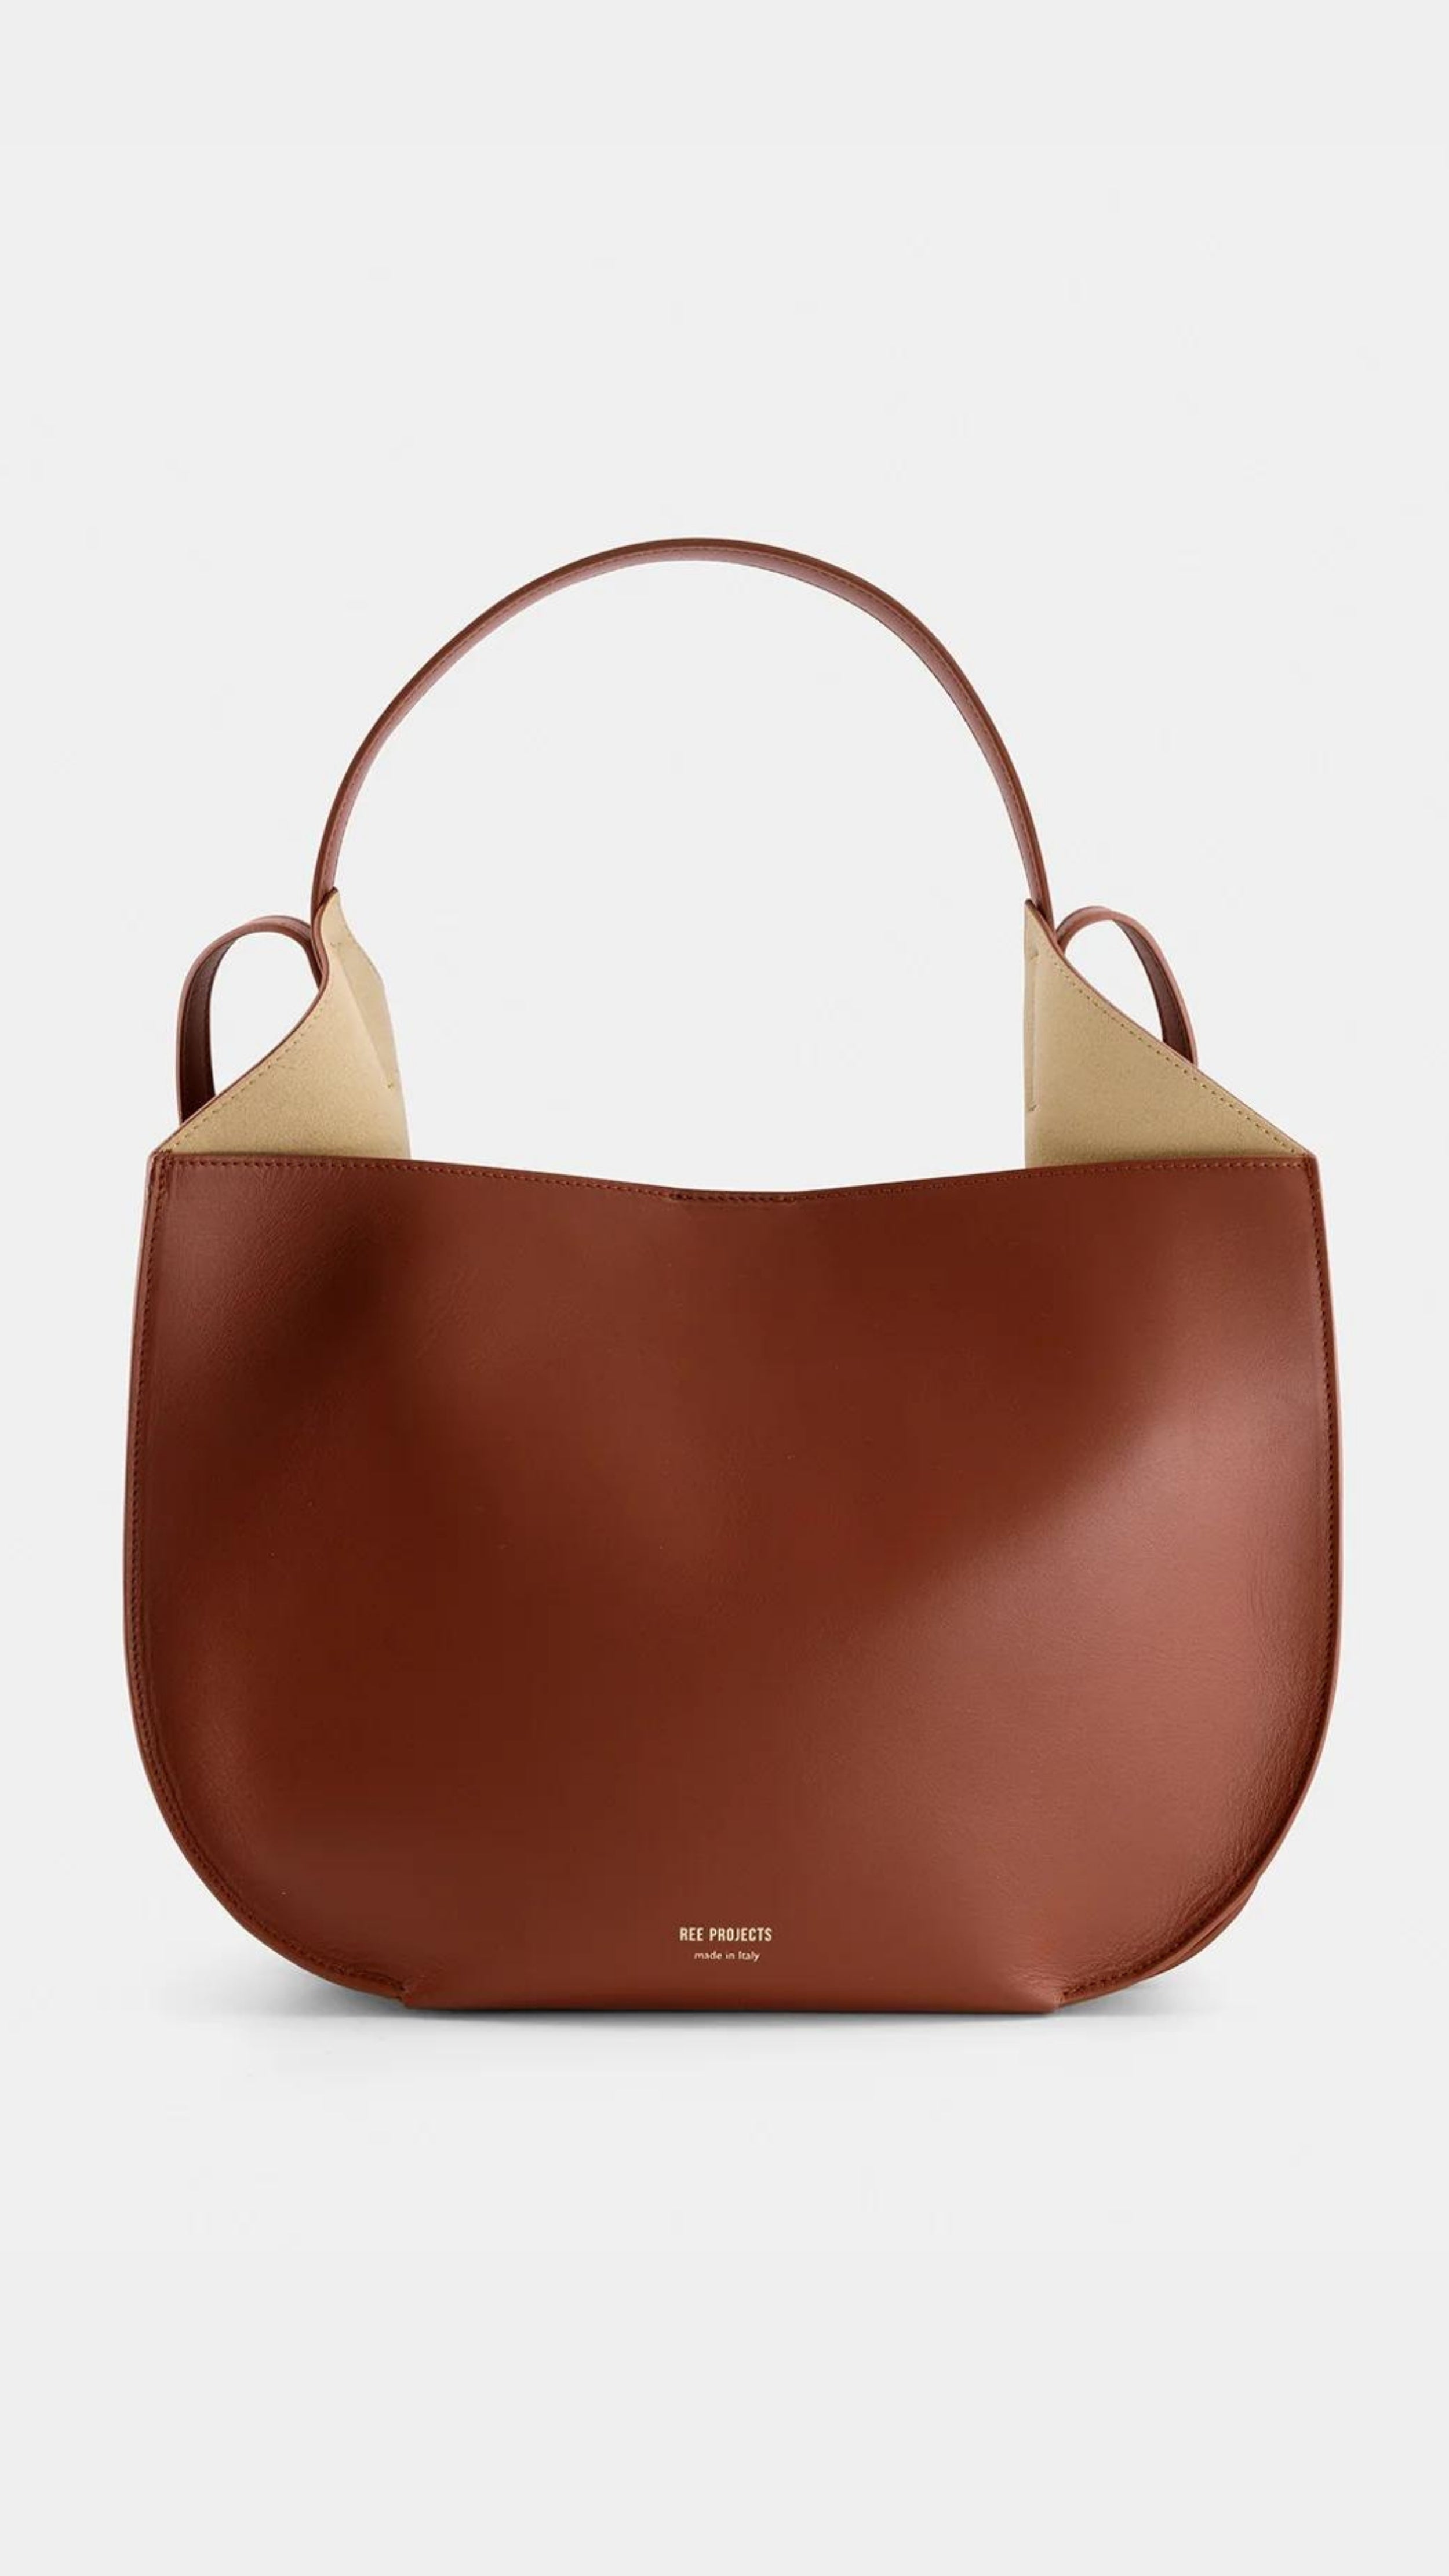 Ree Projects Helen Hobo in Cognac Soft Calf. Medium sized hobo style tote bag made from super soft italian leather. sustainably made in a cognac color. Shown from the front view.